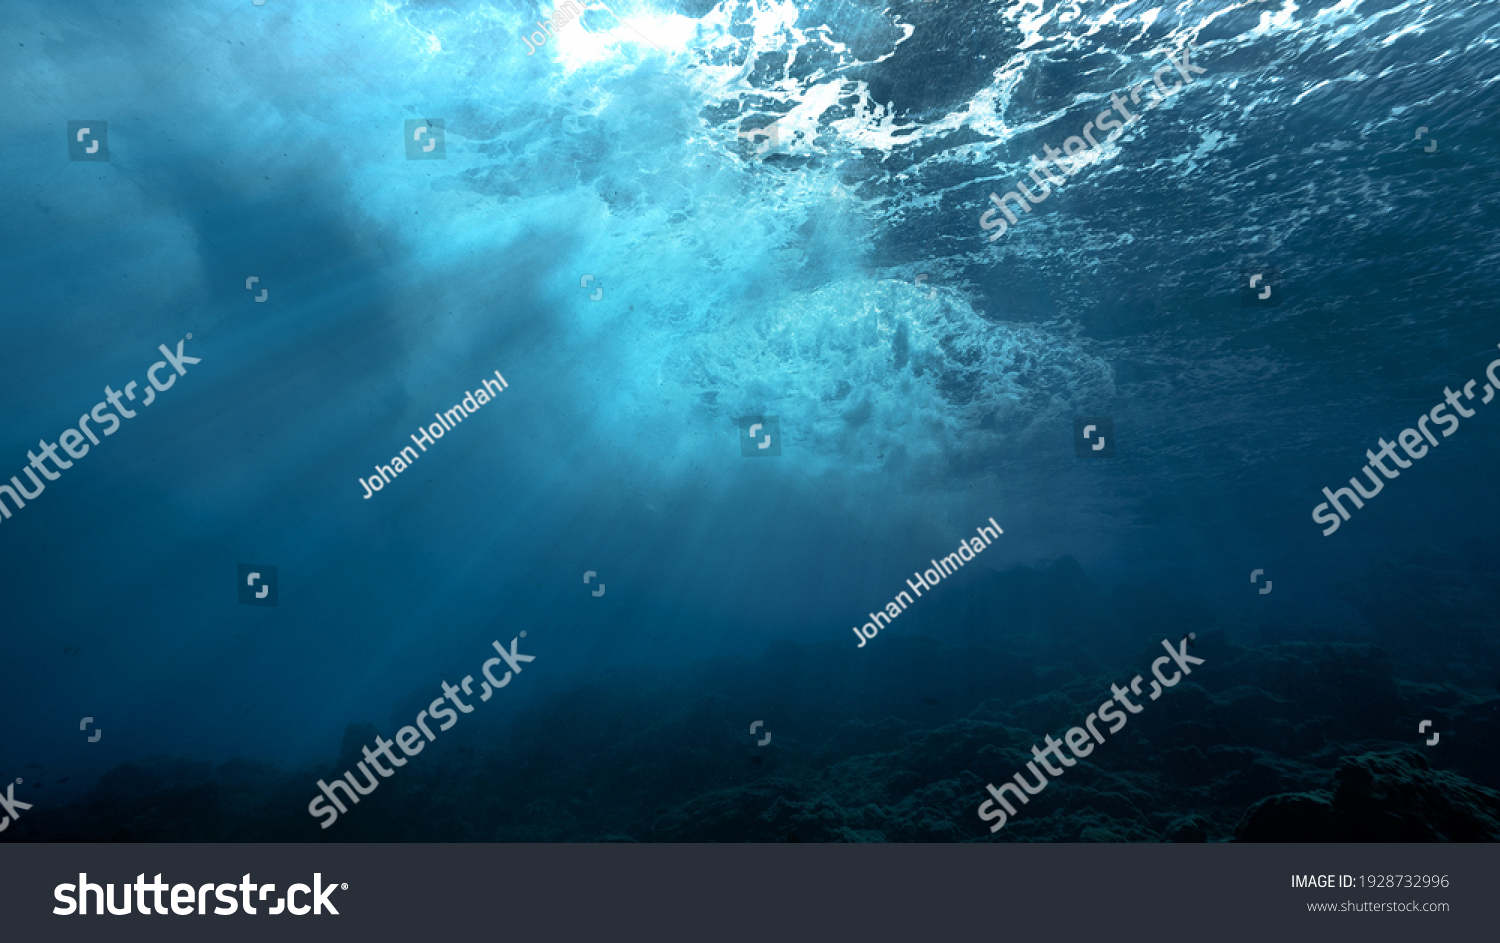 Artistic Underwater photo of waves. From a scuba dive in the canary island in the Atlantic Ocean. Spain #1928732996